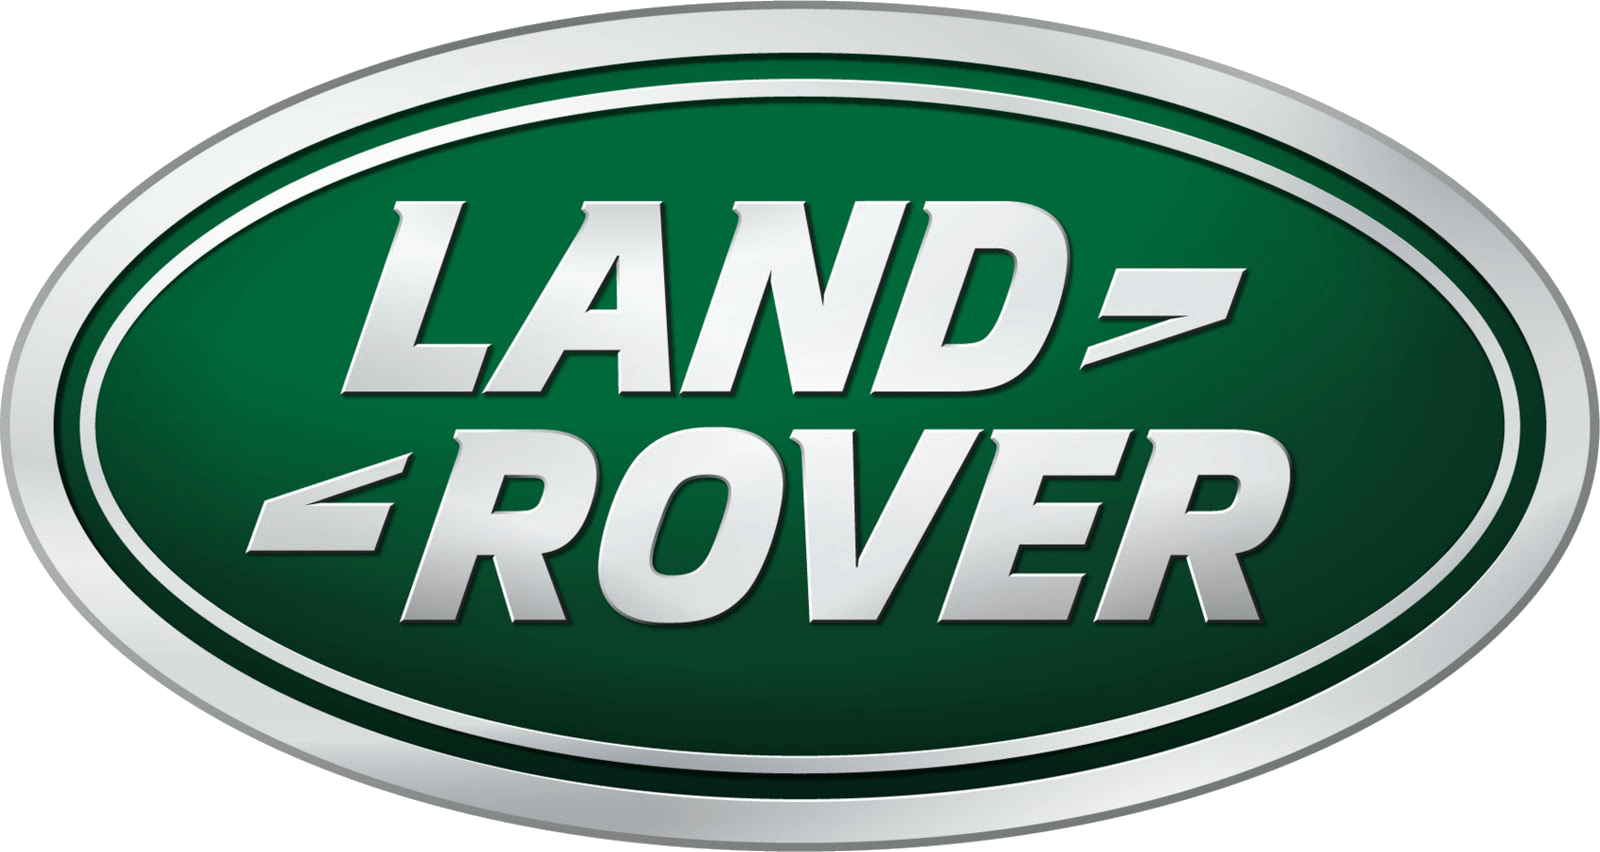 Car Green Oval Logo - Land Rover Logo, Land Rover Car Symbol Meaning and History | Car ...